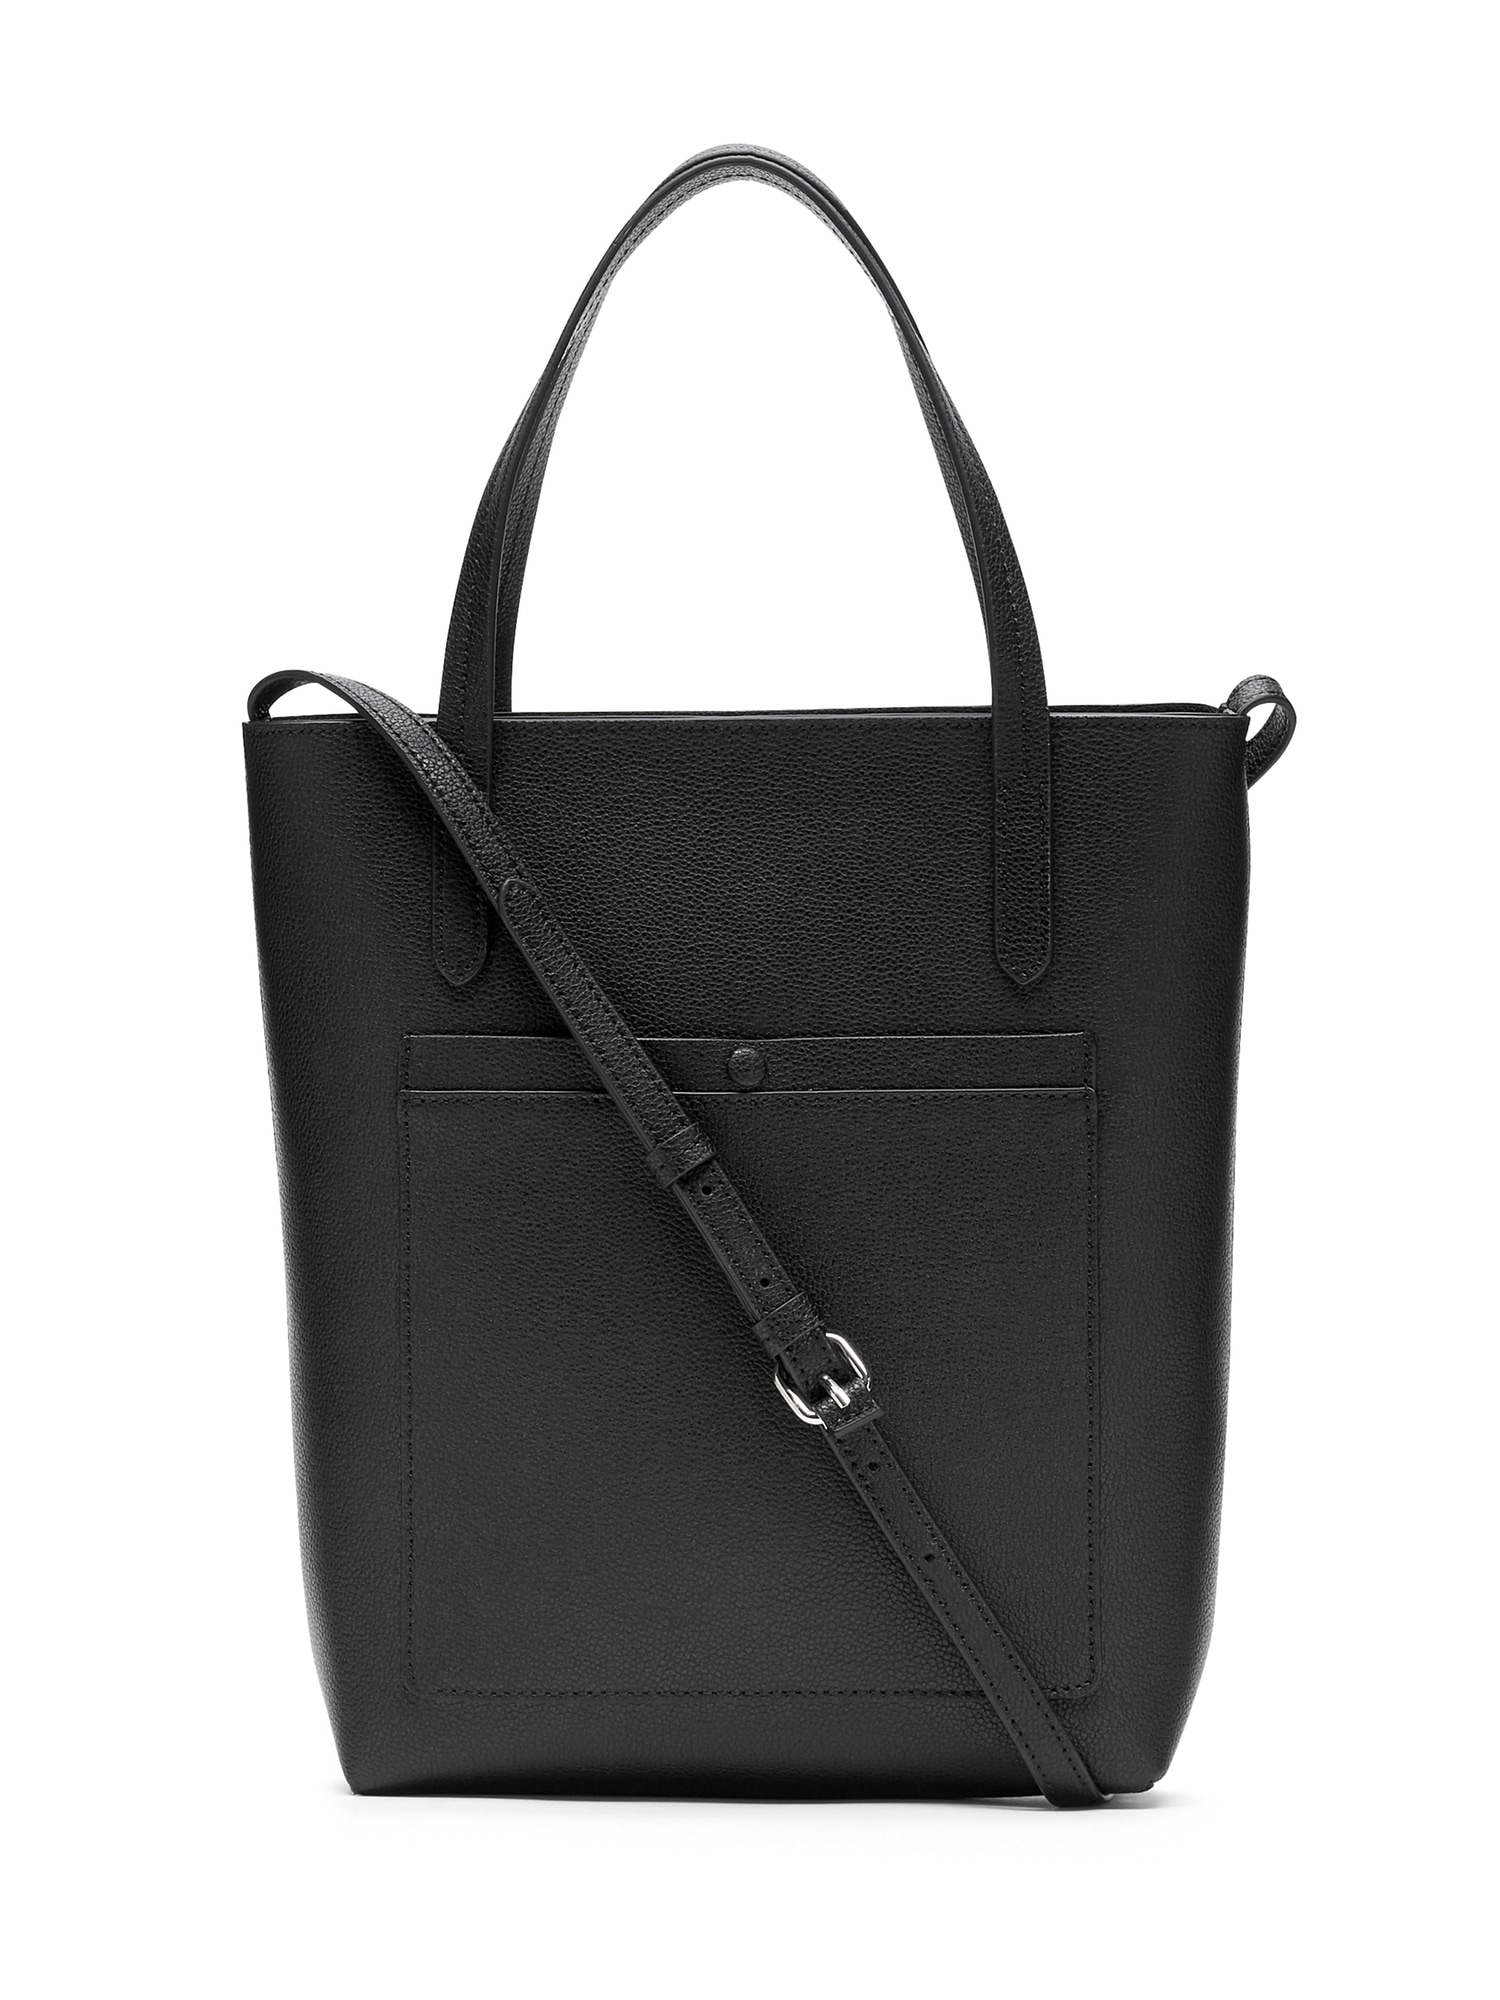 12-Hour Leather Tote | Banana Republic